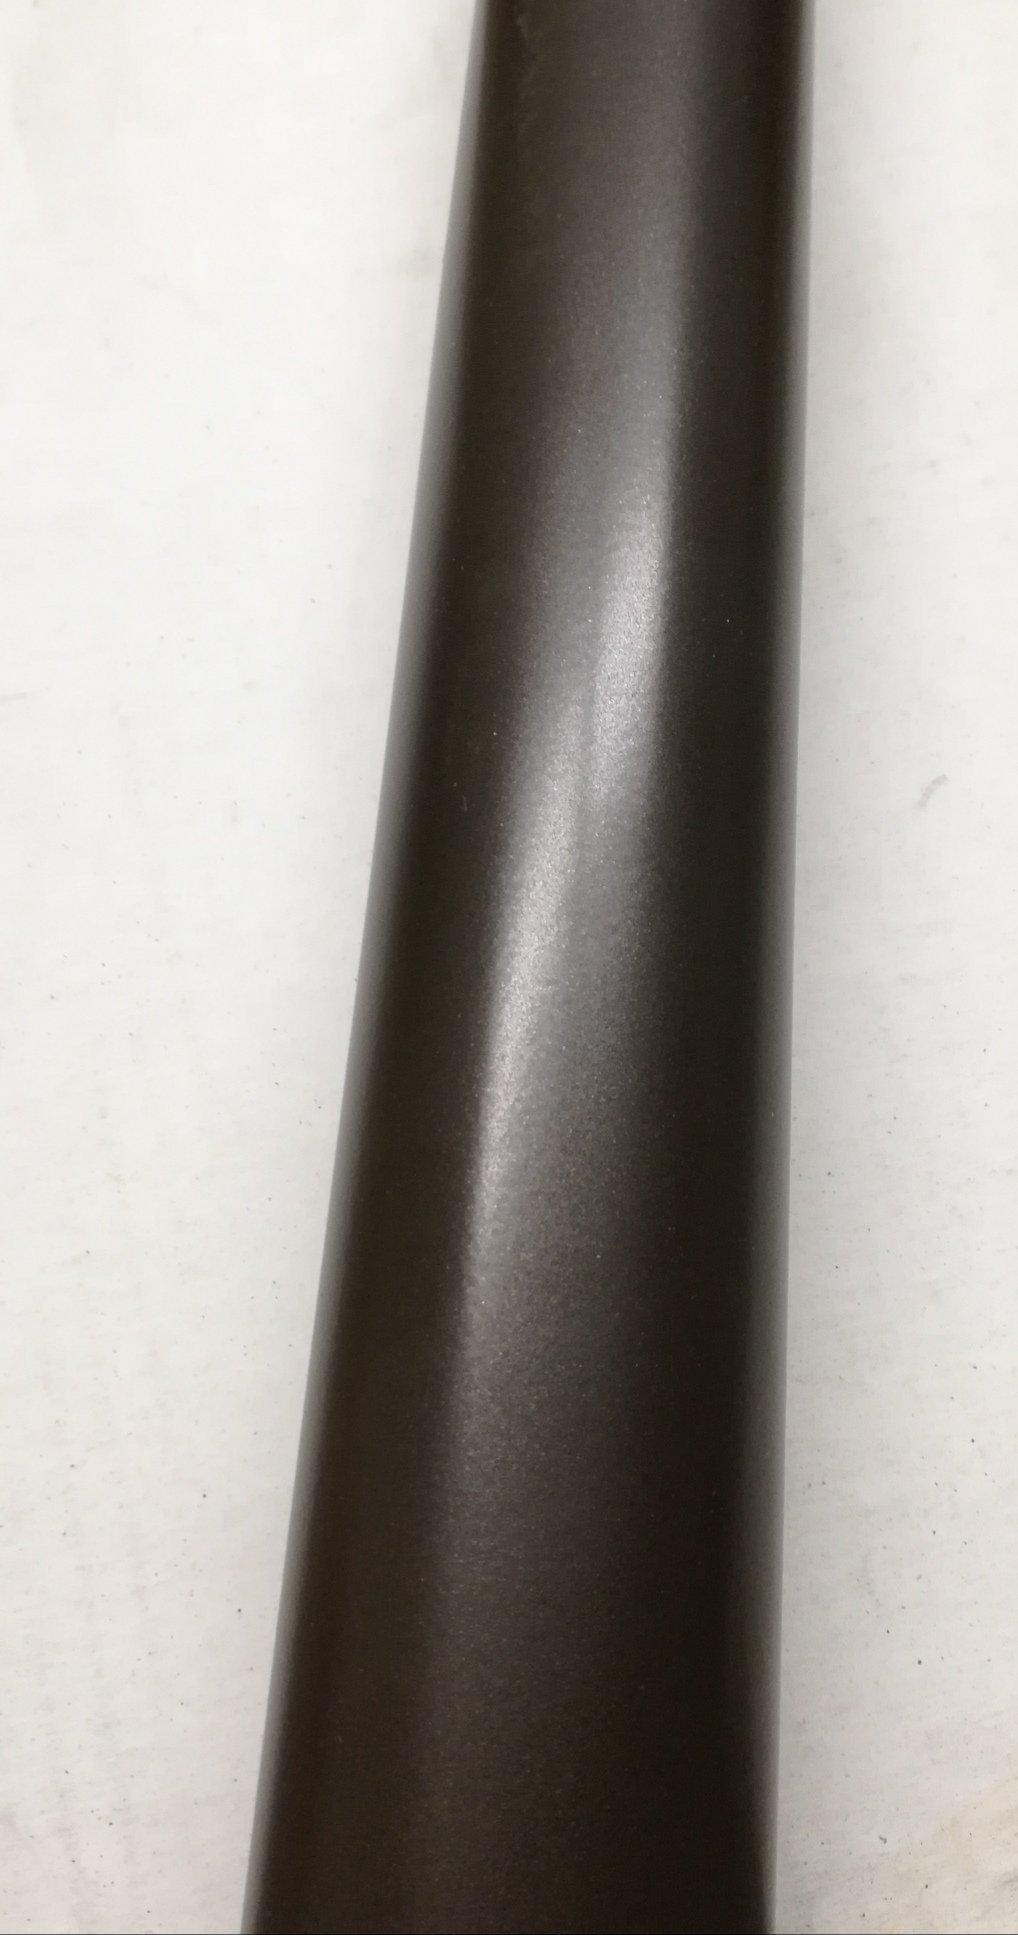 2" Outside Diameter Tubing - Order by the Foot Tubing & U-channels, Components for 2" Od Tubing, Drapery Hardware OilRubbedBronze-Specialfinishpleasecalltoinquire8- Trade Diversified